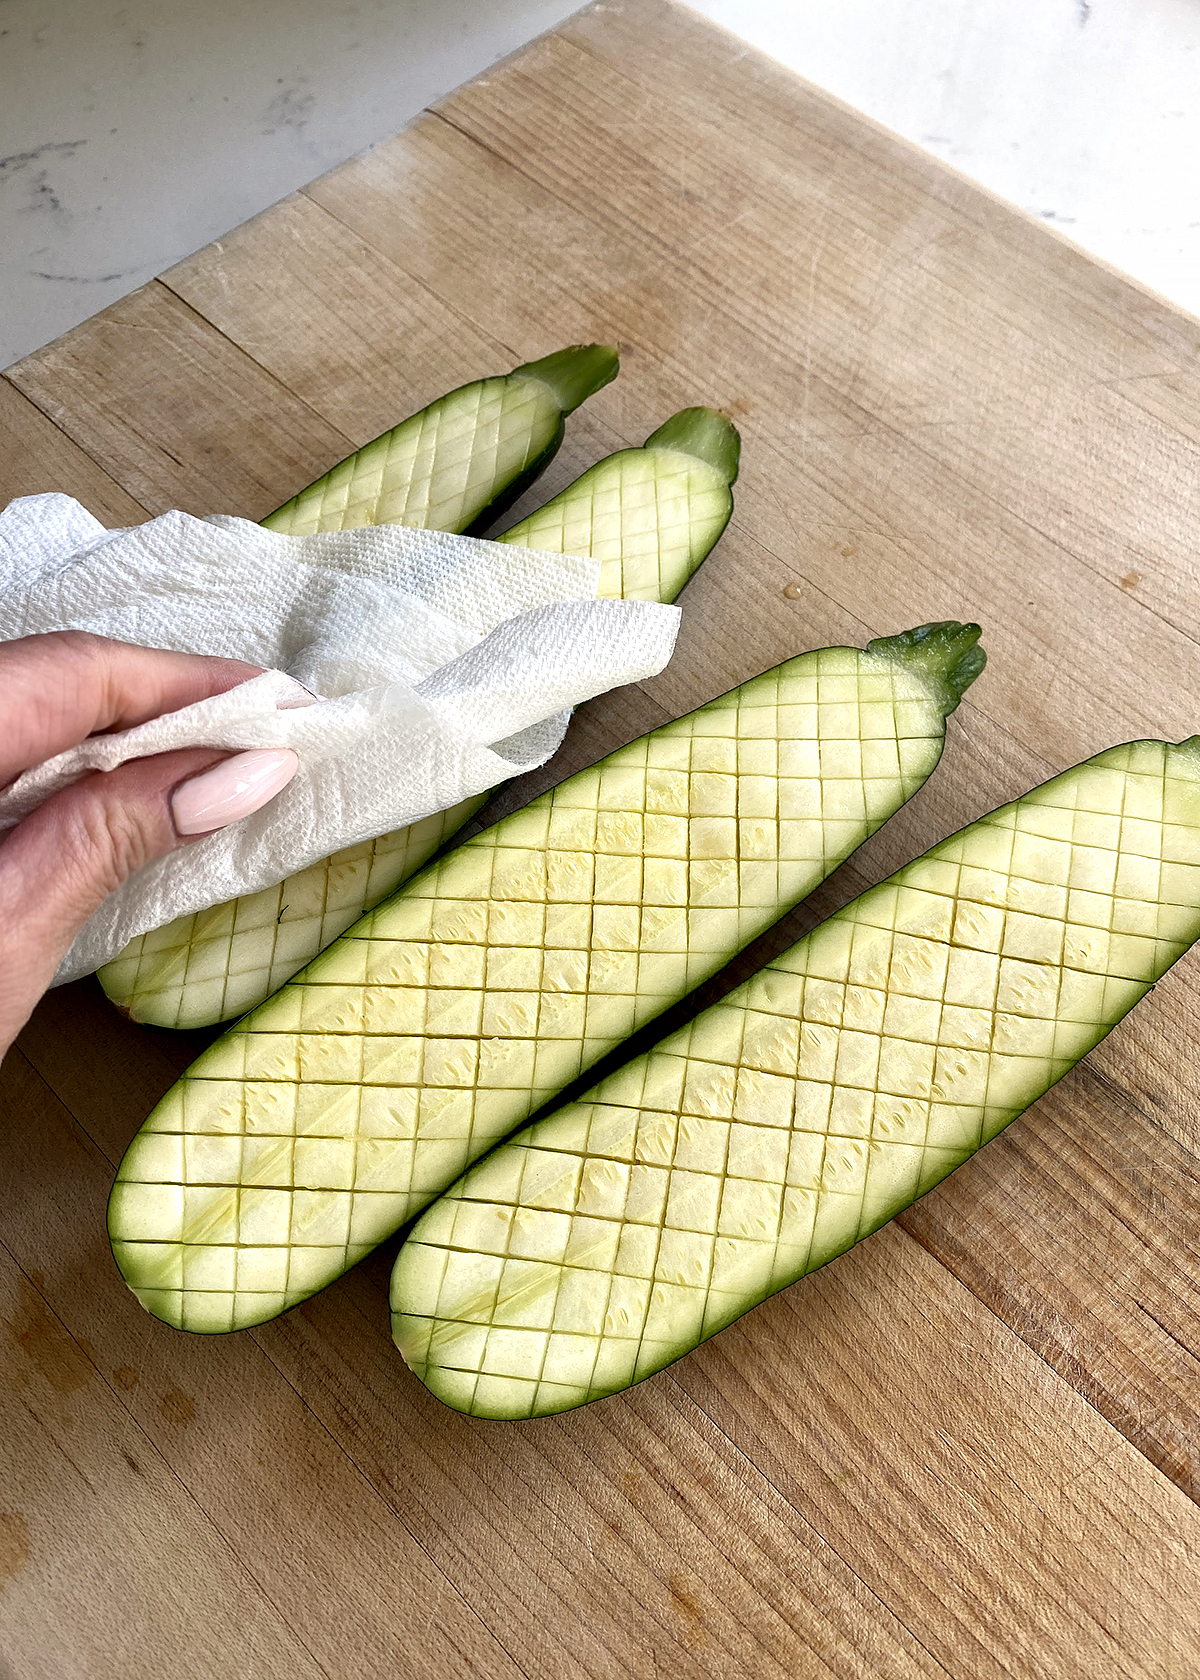 oven roasted zucchini sliced lengthwise, and cut with small cross-hatches thomas keller style, on cutting board, blotted with paper towel